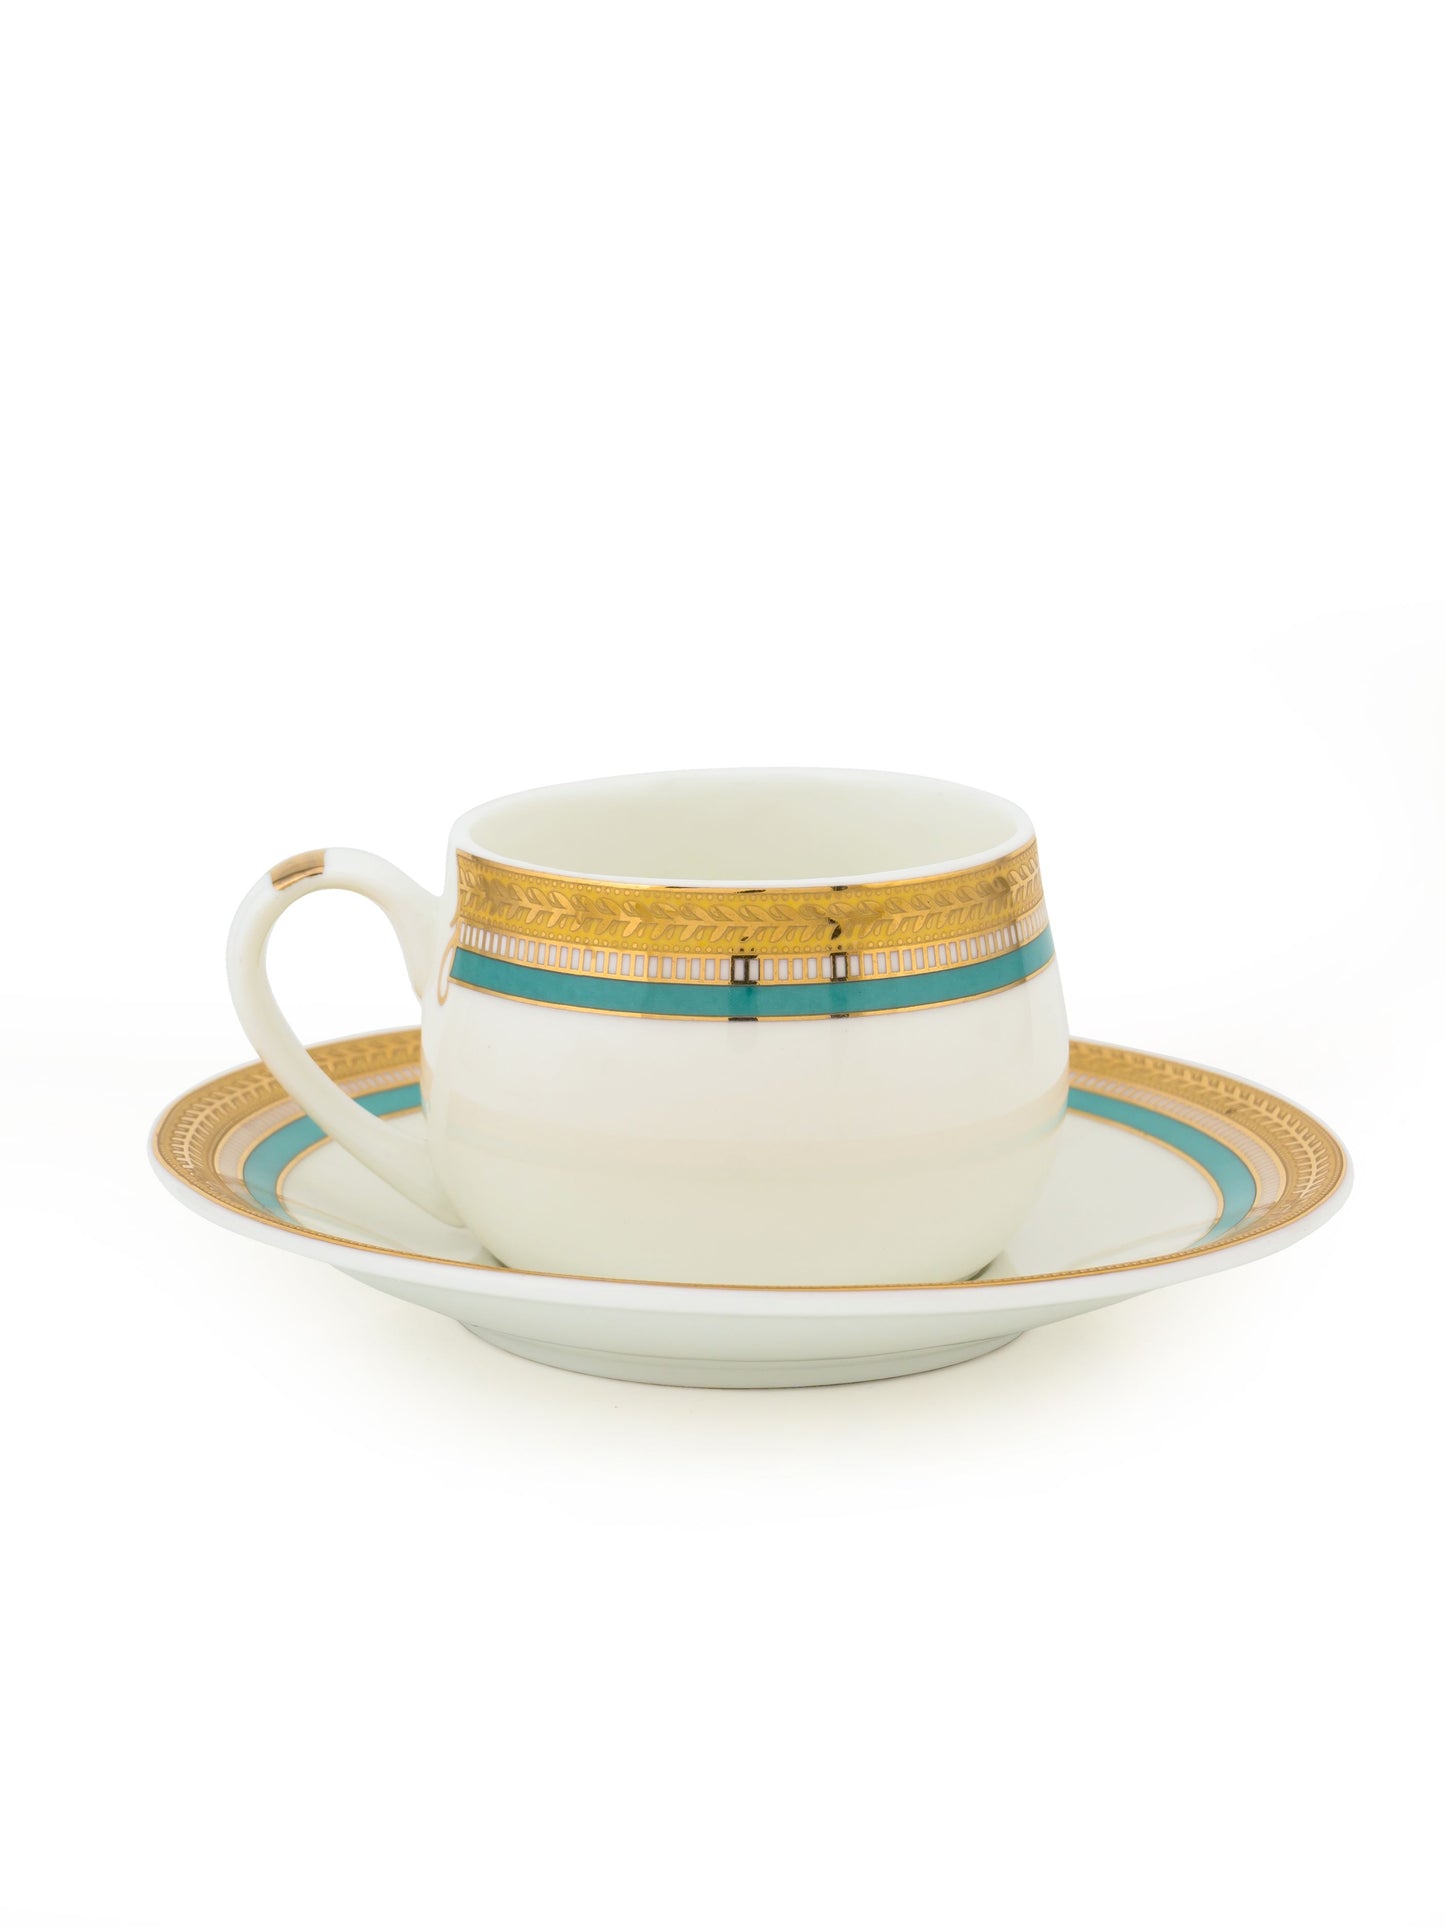 JCPL Coral Aroma Cup & Saucer, 145ml, Set of 12 (6 Cups + 6 Saucers) (AS2)